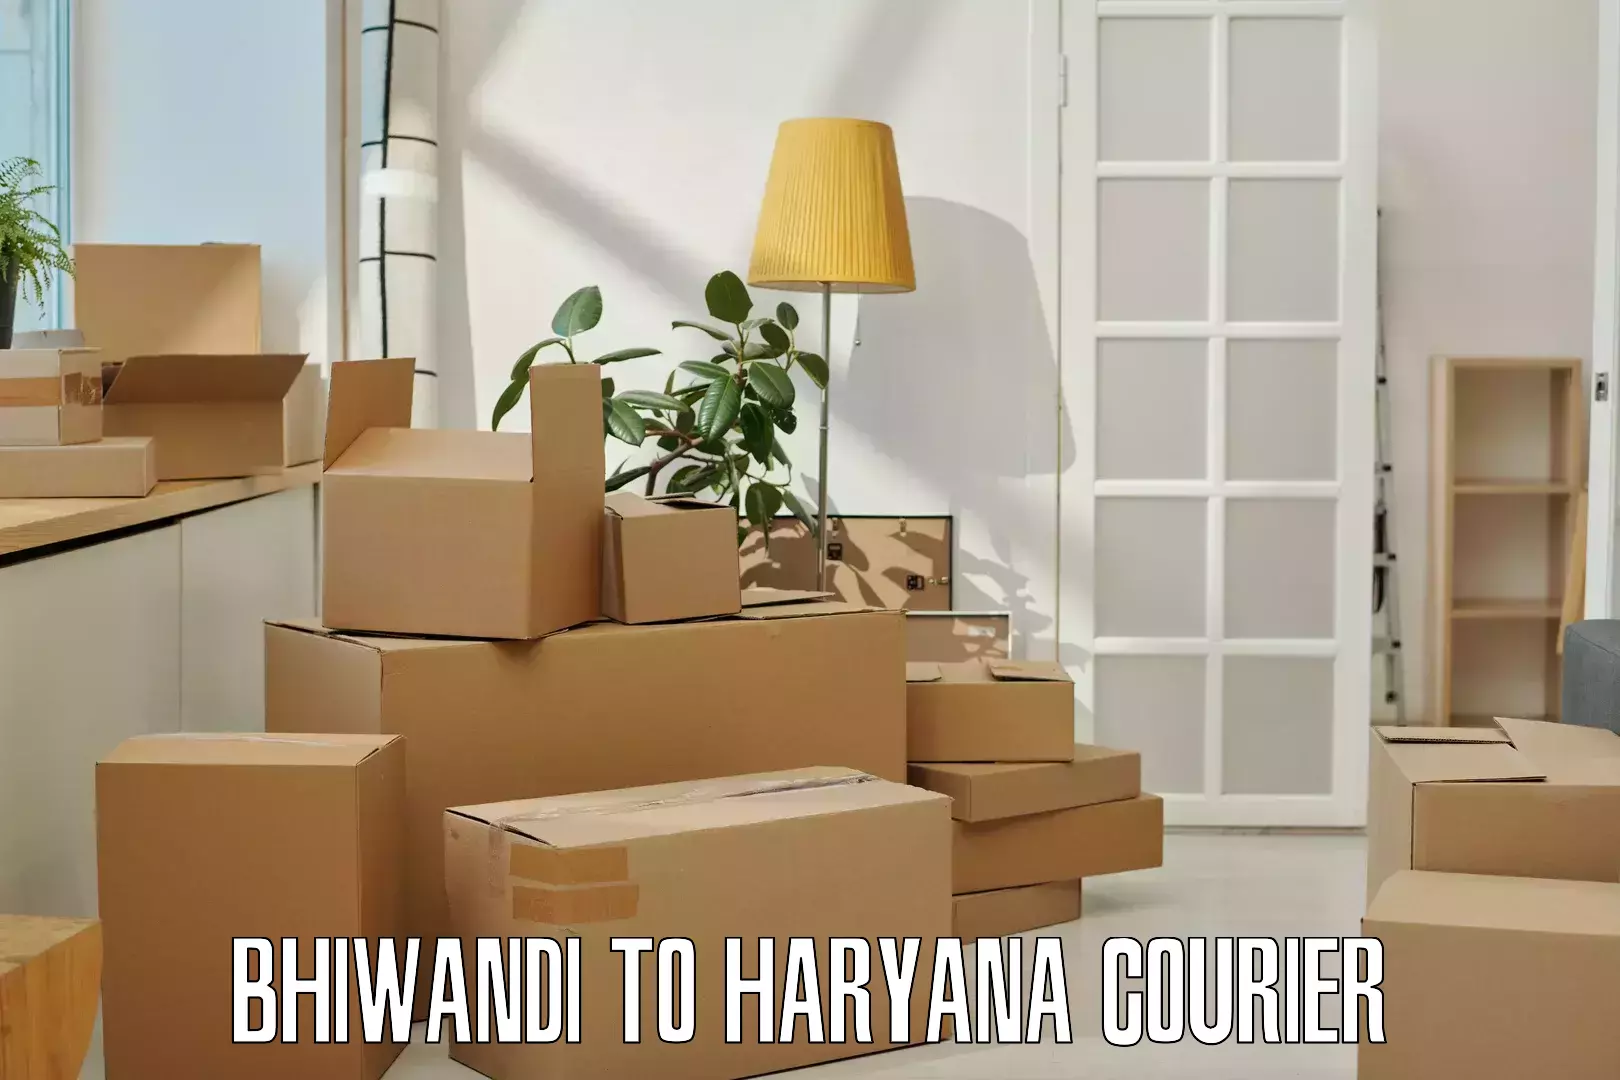 Reliable delivery network Bhiwandi to Hisar